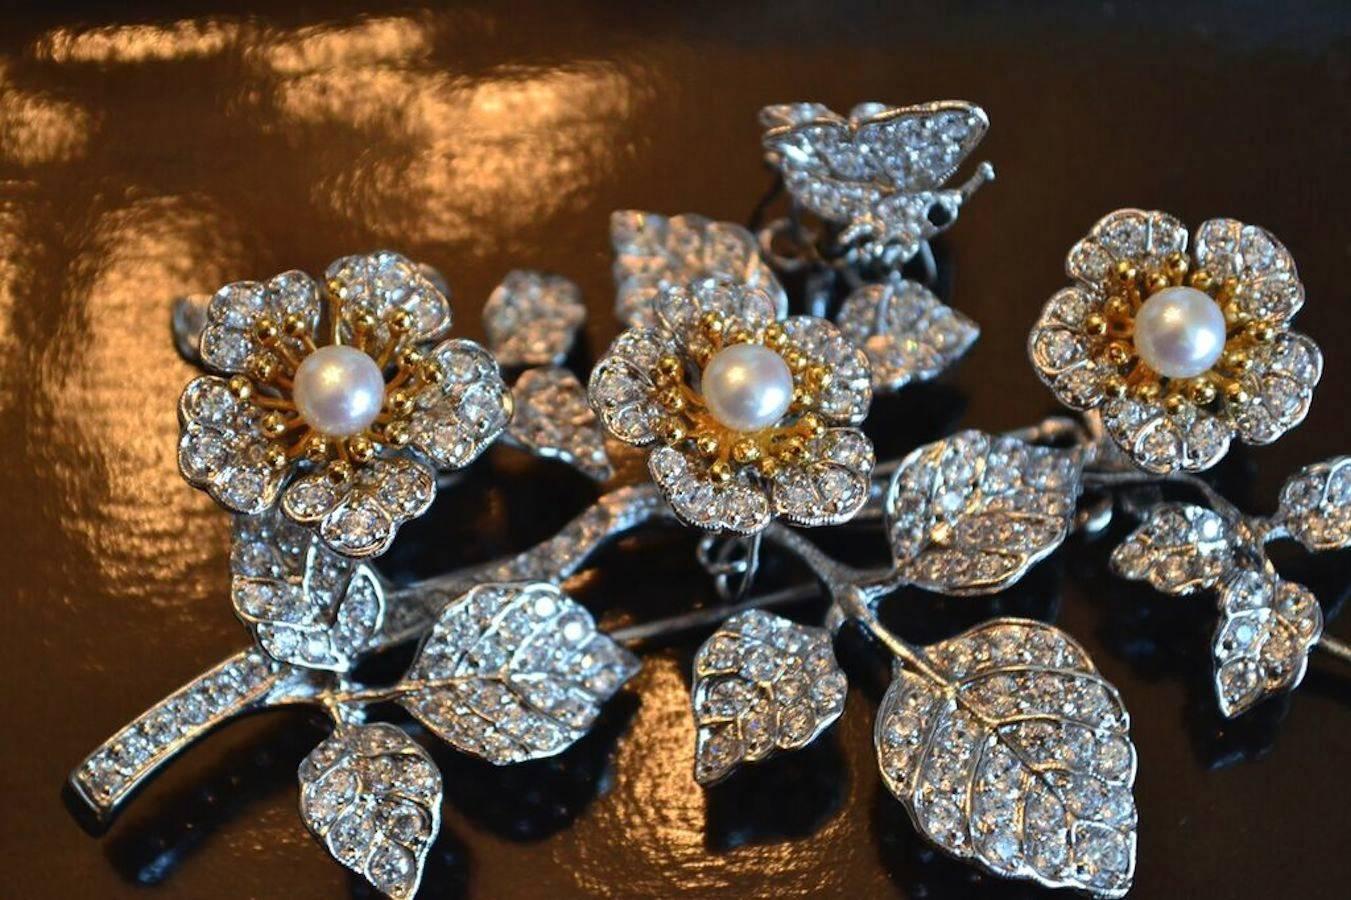 Triple flower bouquet with Japanese pearls, Cubic zirconia, sterling silver, and gold plate.